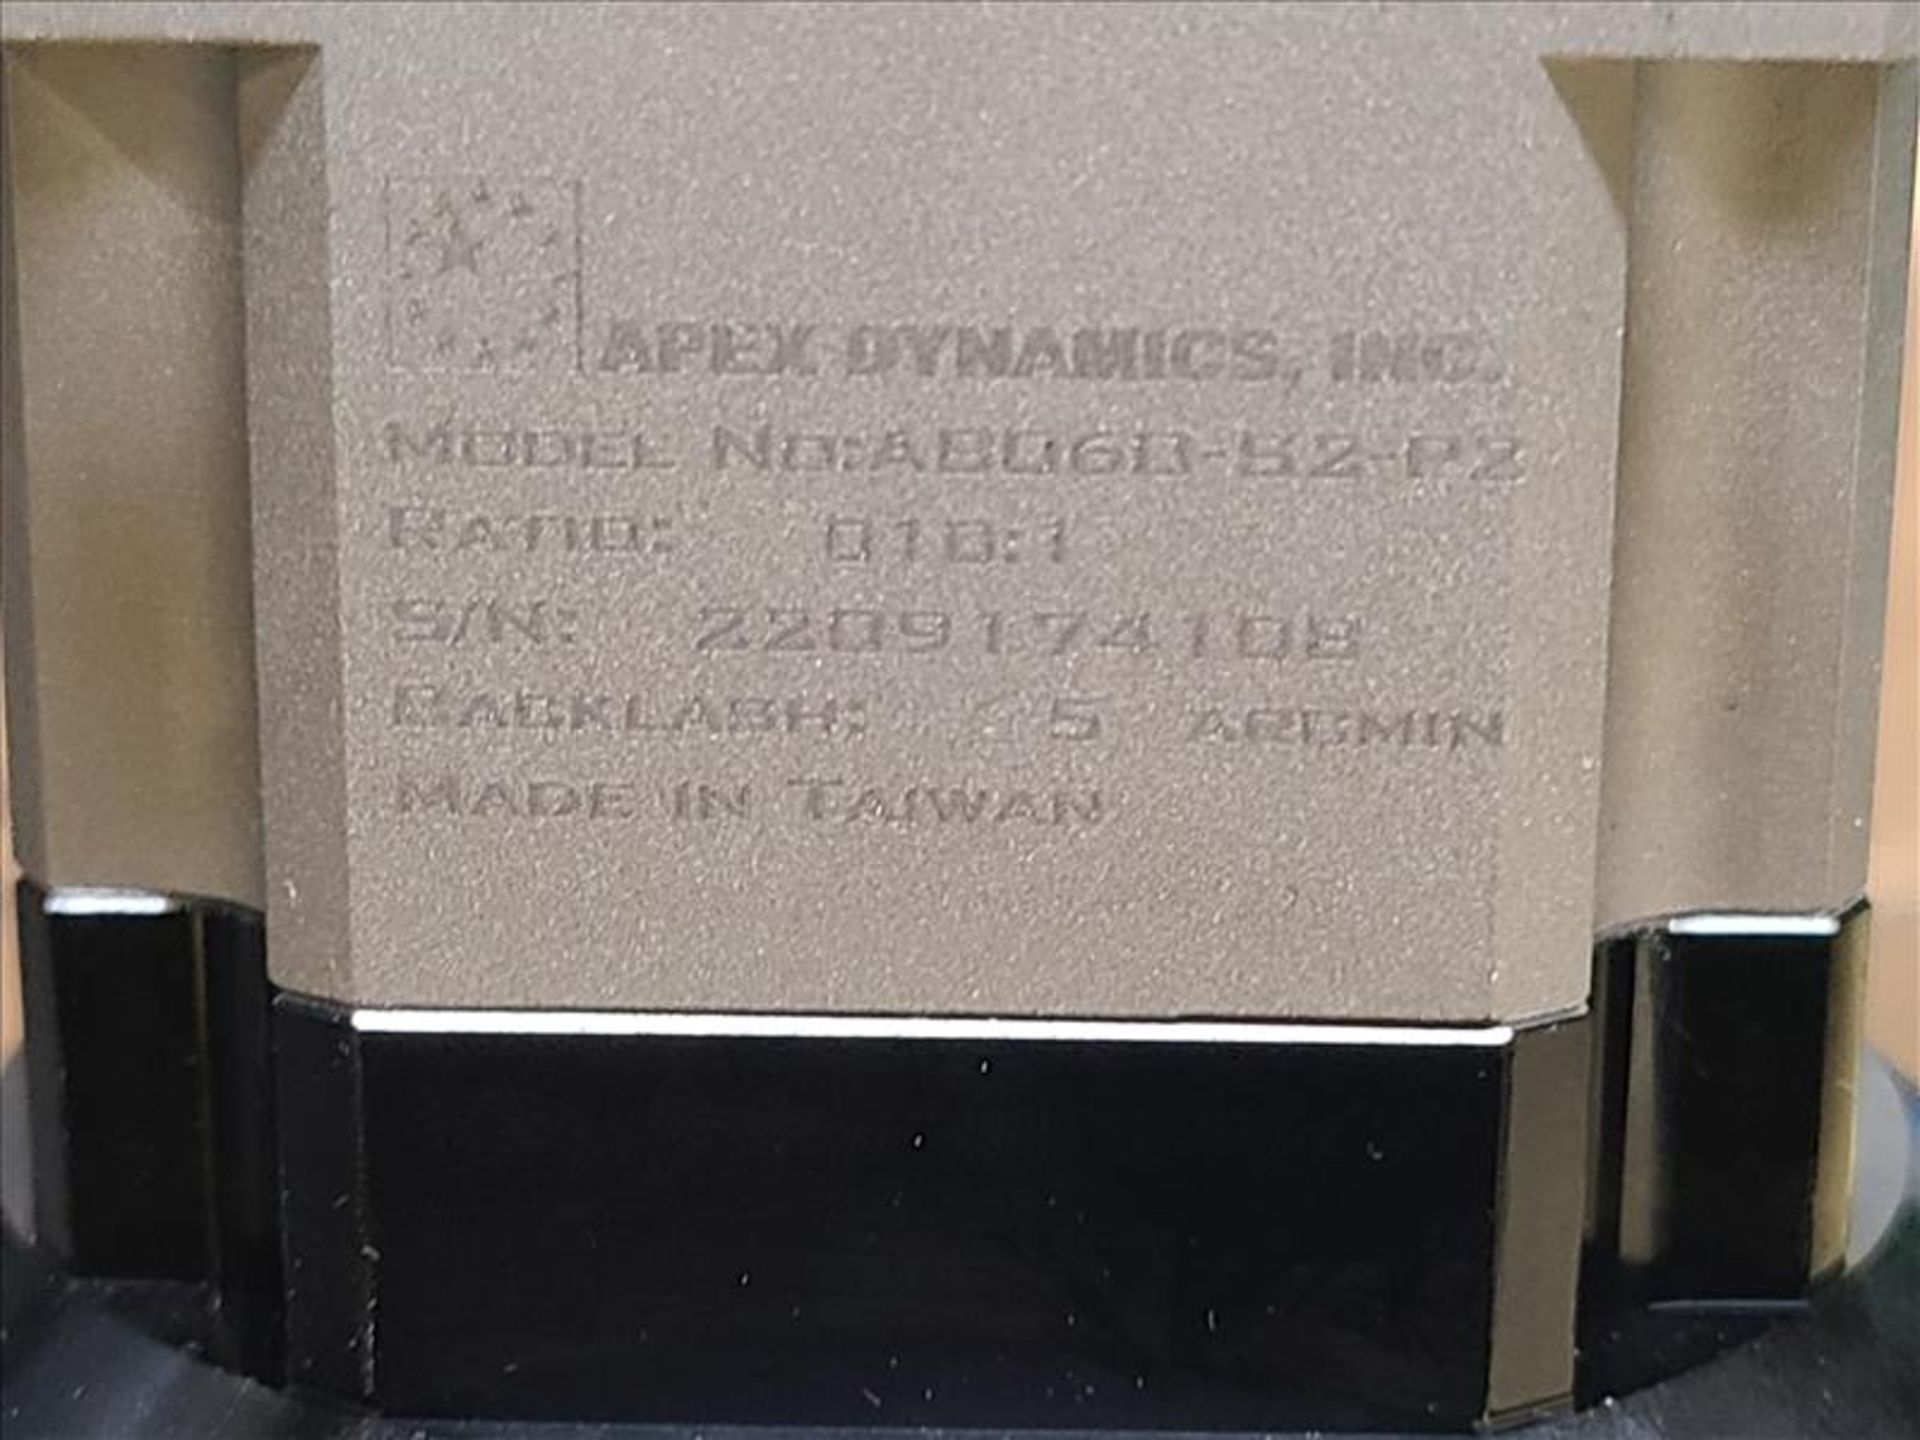 (2) Apex Dynamics Gearboxes, model AB060-S2-P2 - Image 4 of 6